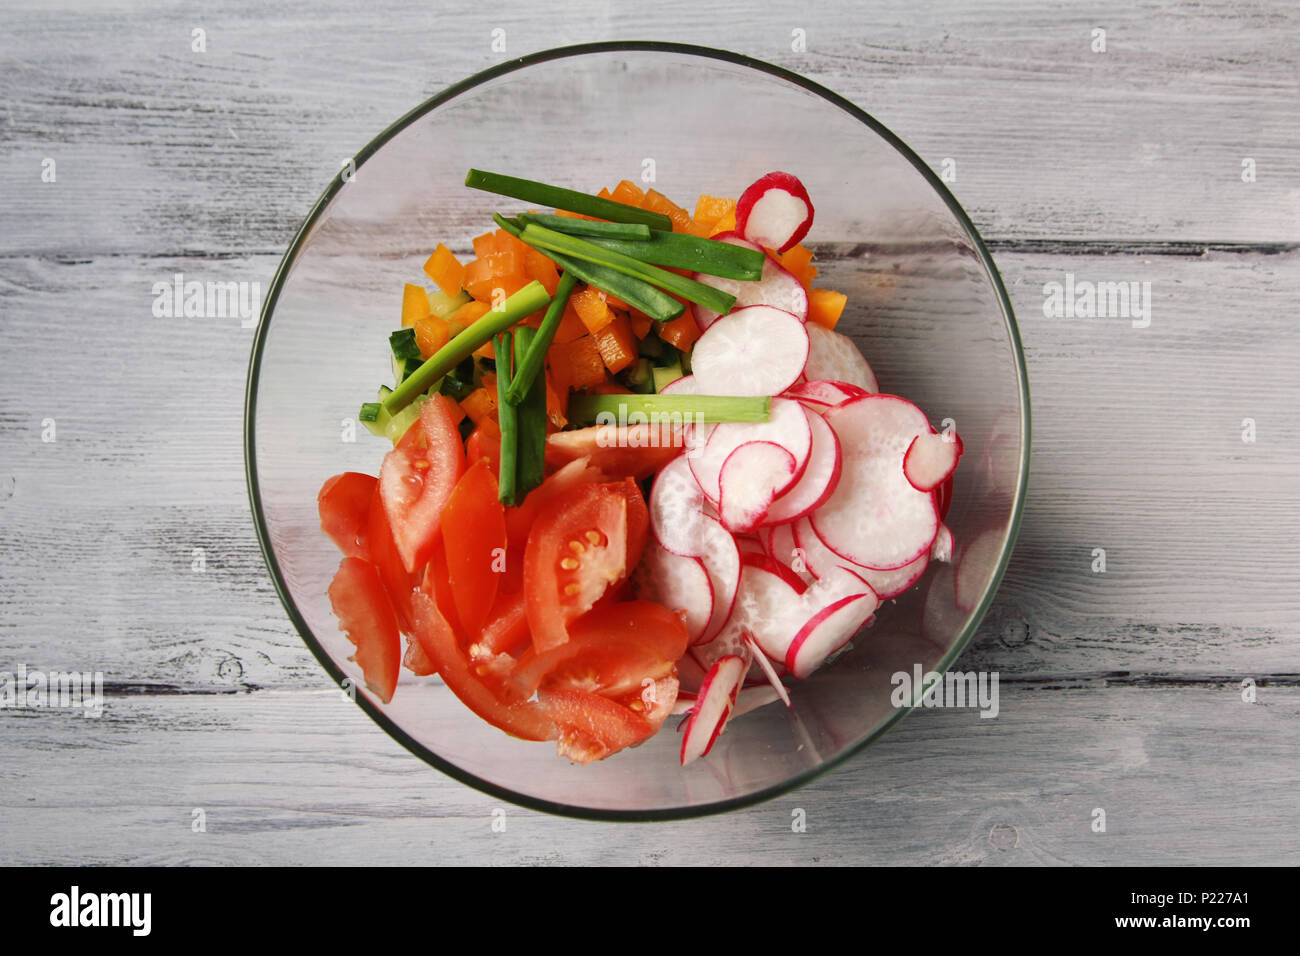 Glass bowl with vegetables for a vegetarian salad. Radishes, tomatoes, celery, bell pepper, onion and cucumber. White wooden kitchen table. Close up.  Stock Photo